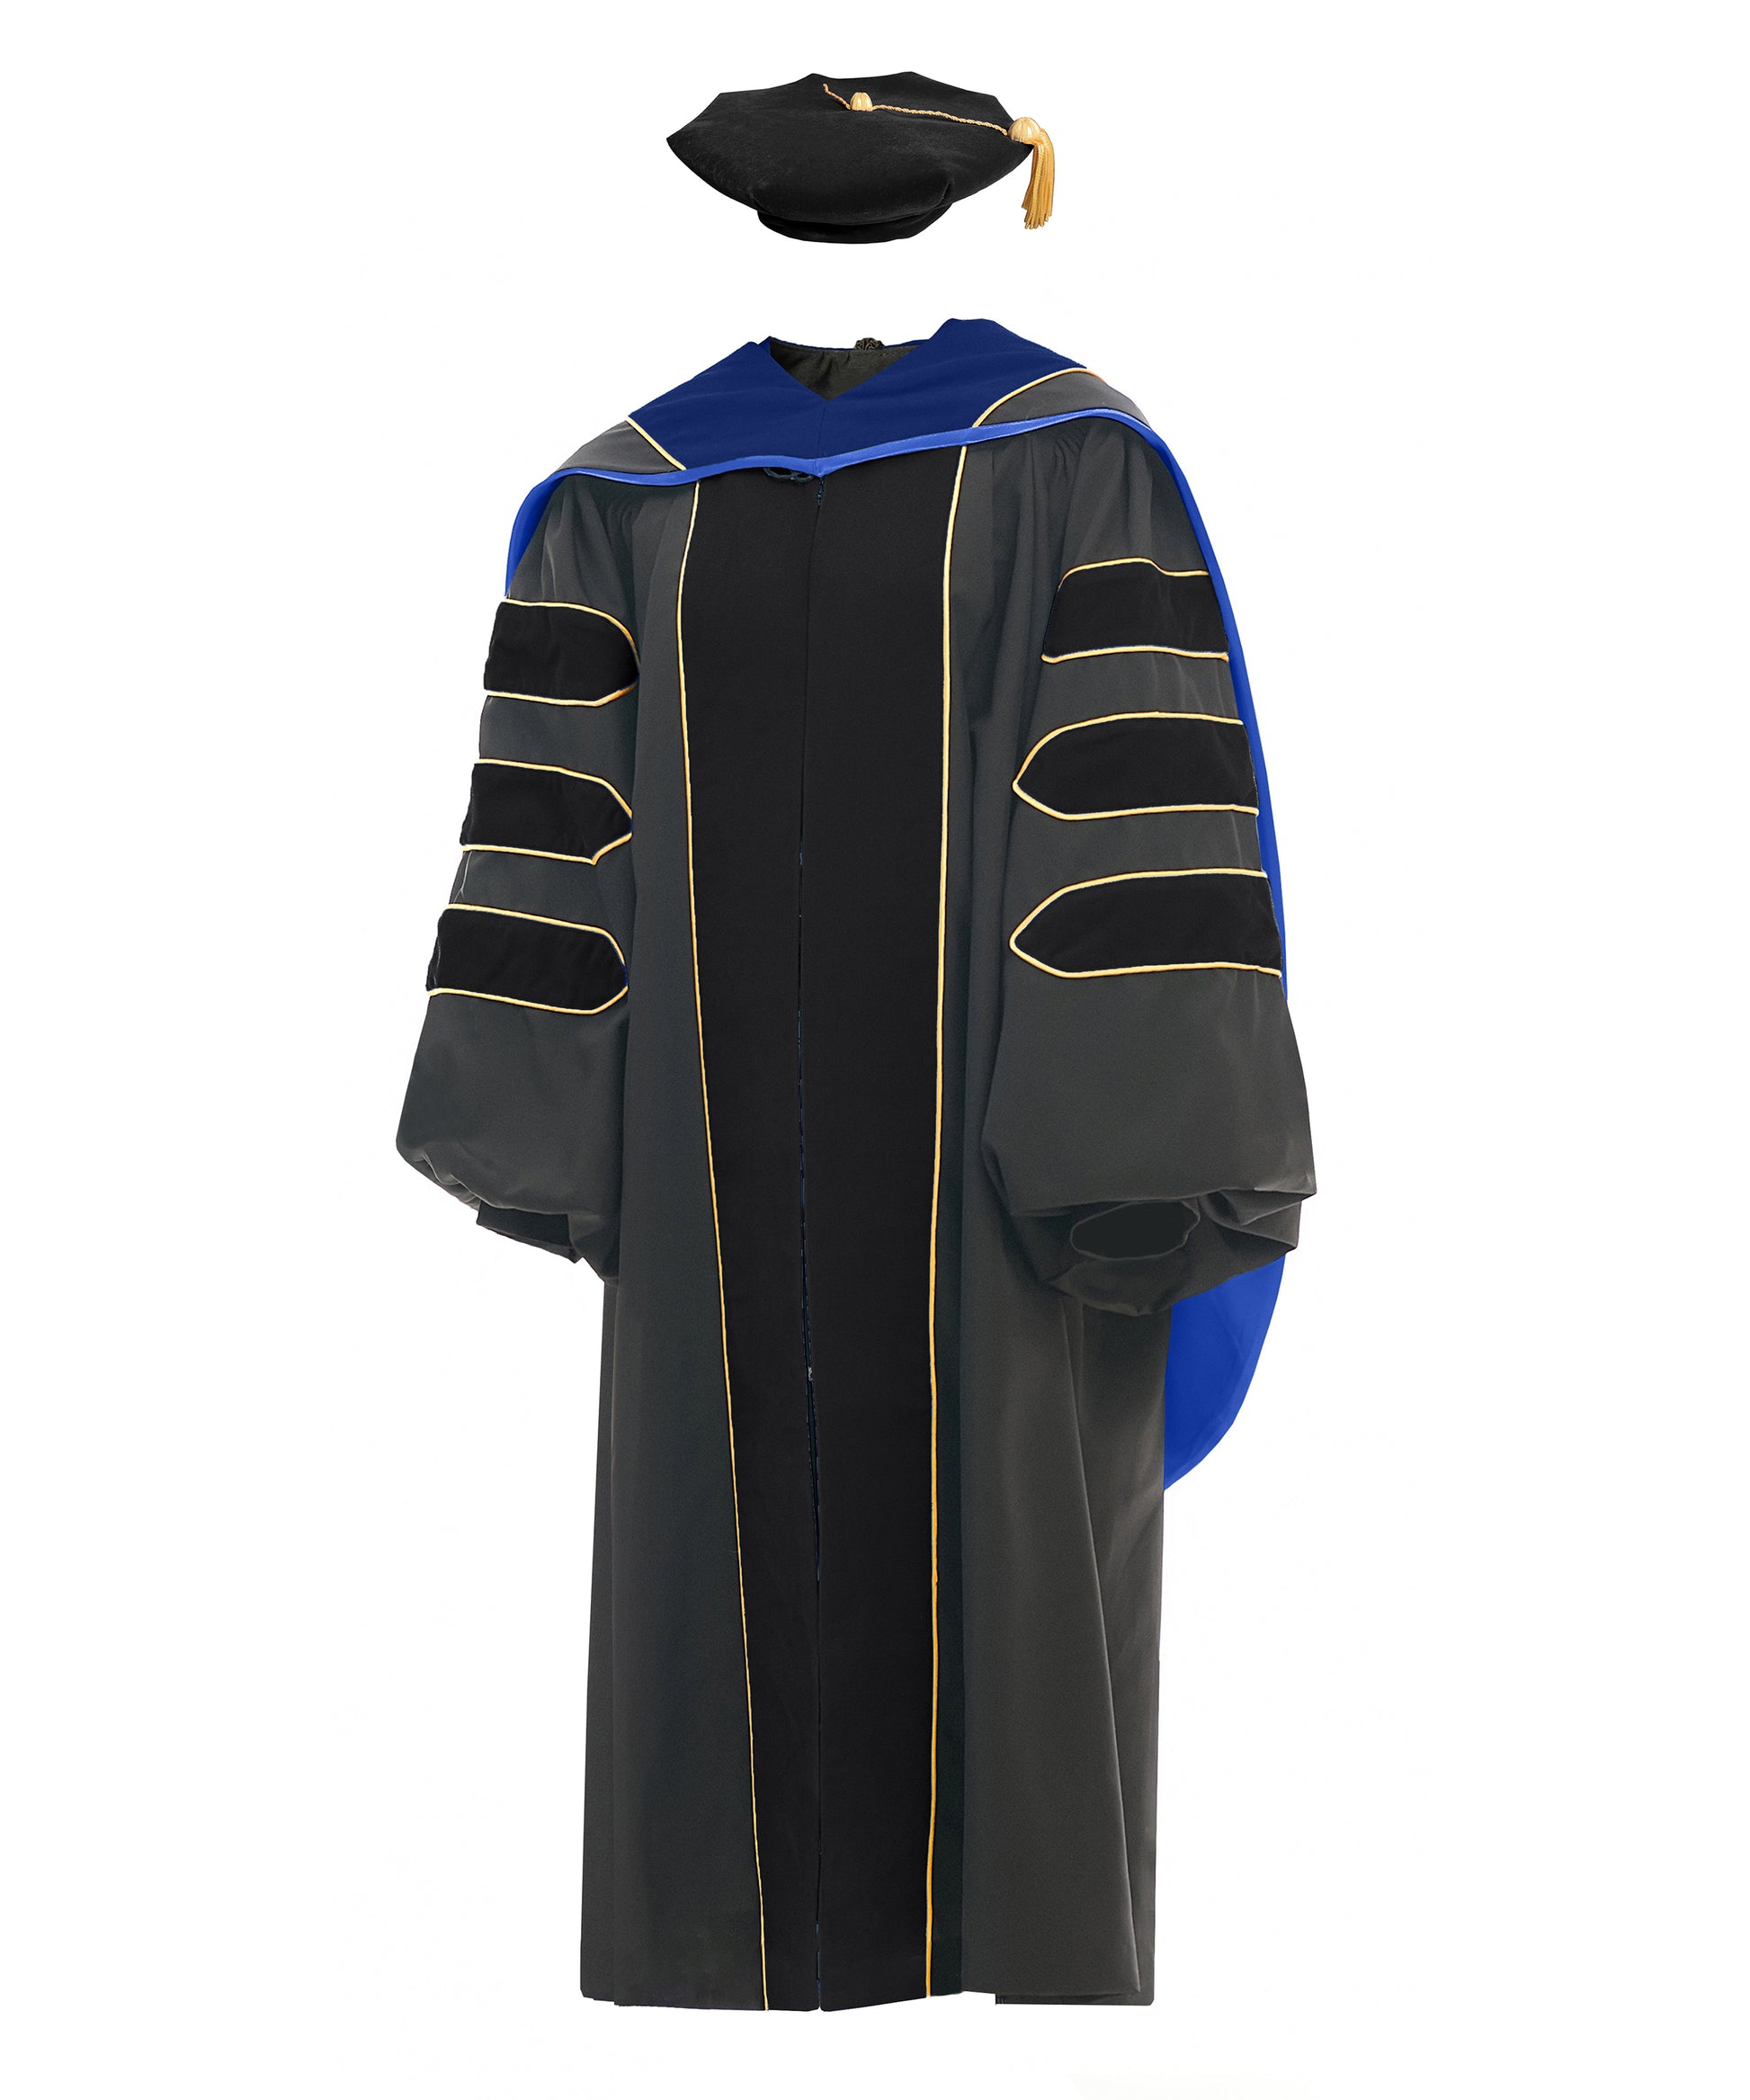 Doctoral Graduation Gowns and Hoods